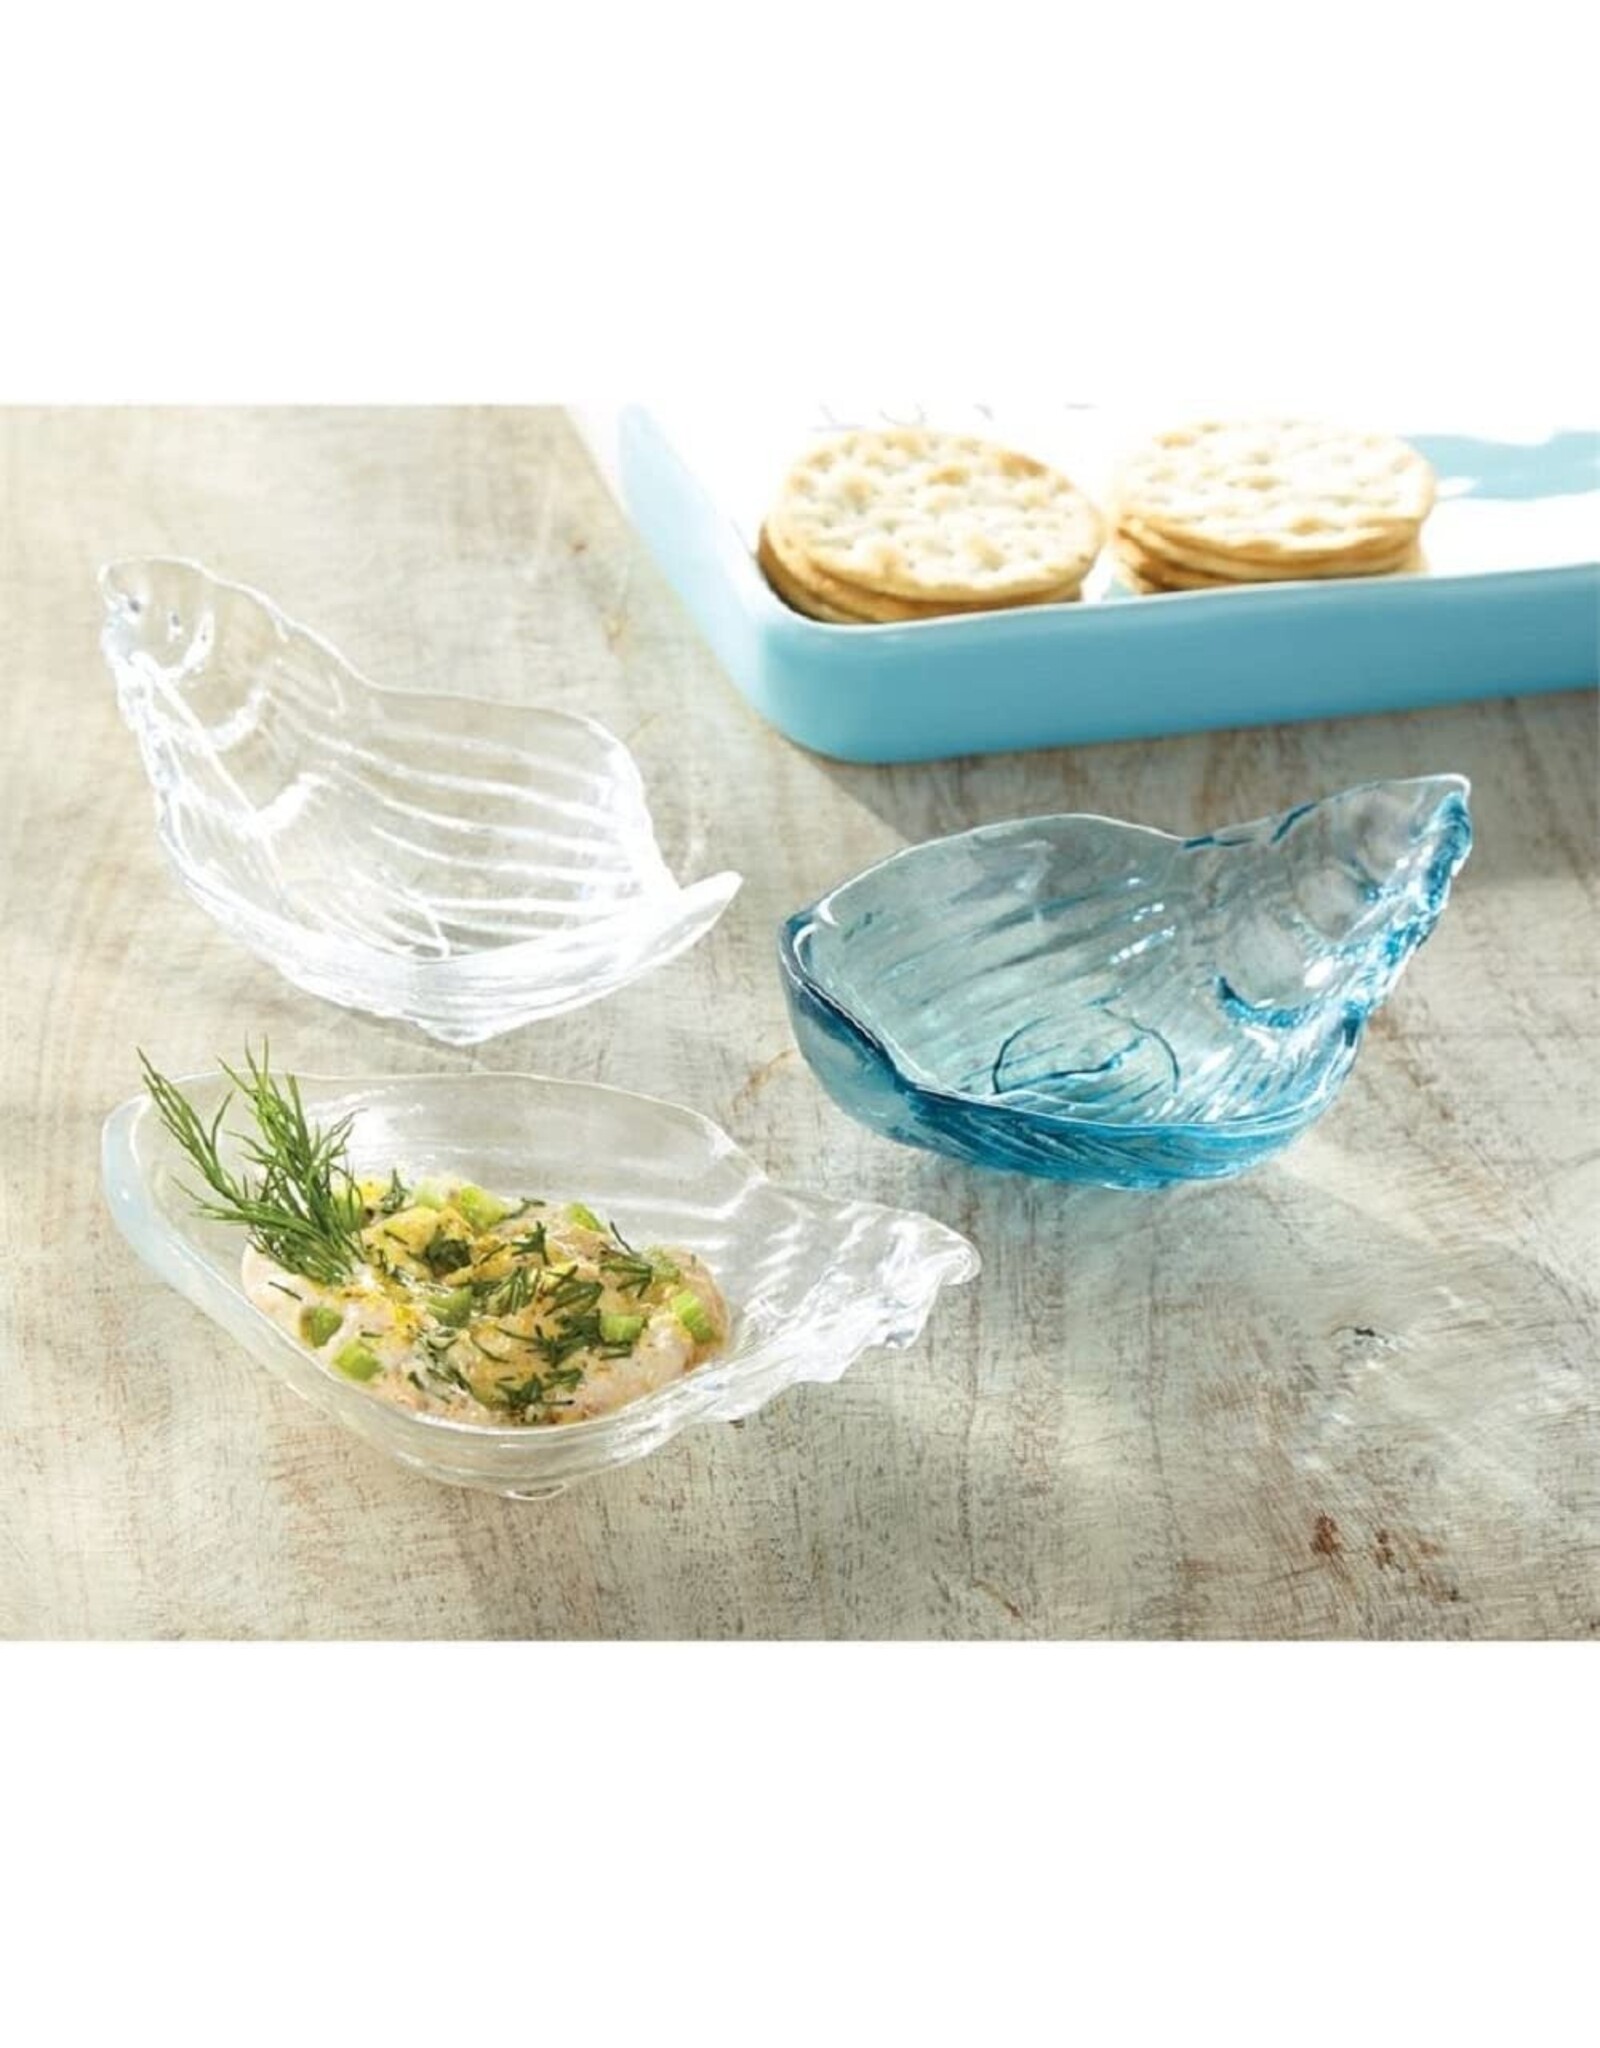 Mud Pie Glass Conch Shell Dip Cups Set 3 5.5x3.5 inch 1 Blue 2 Clear